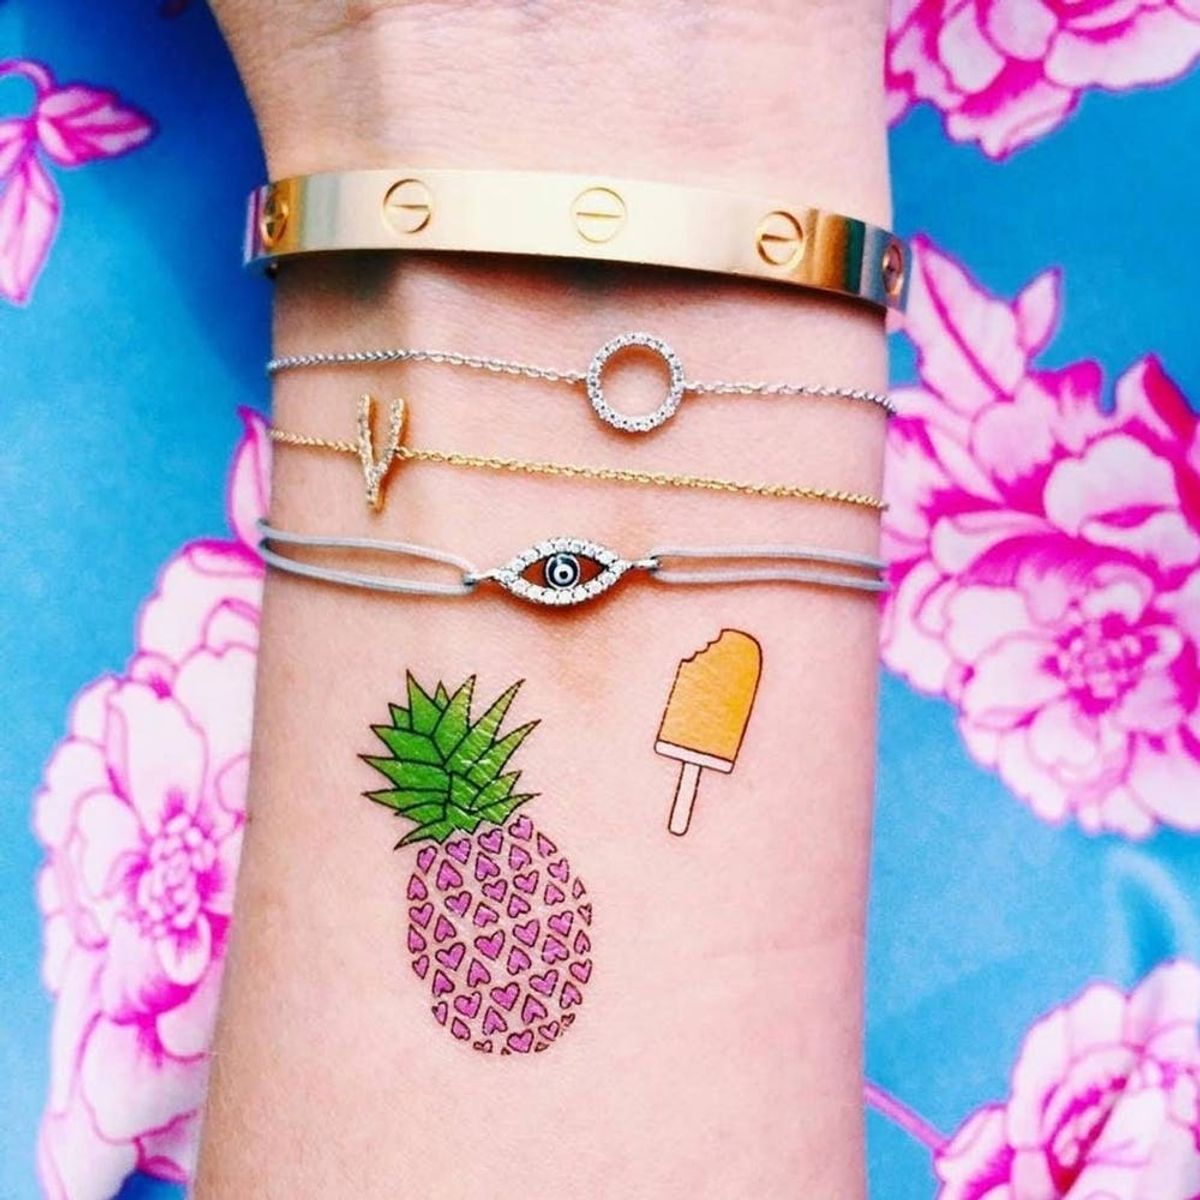 How One Artist Created a Chic Tattoo Brand Out of Her Dorm Room